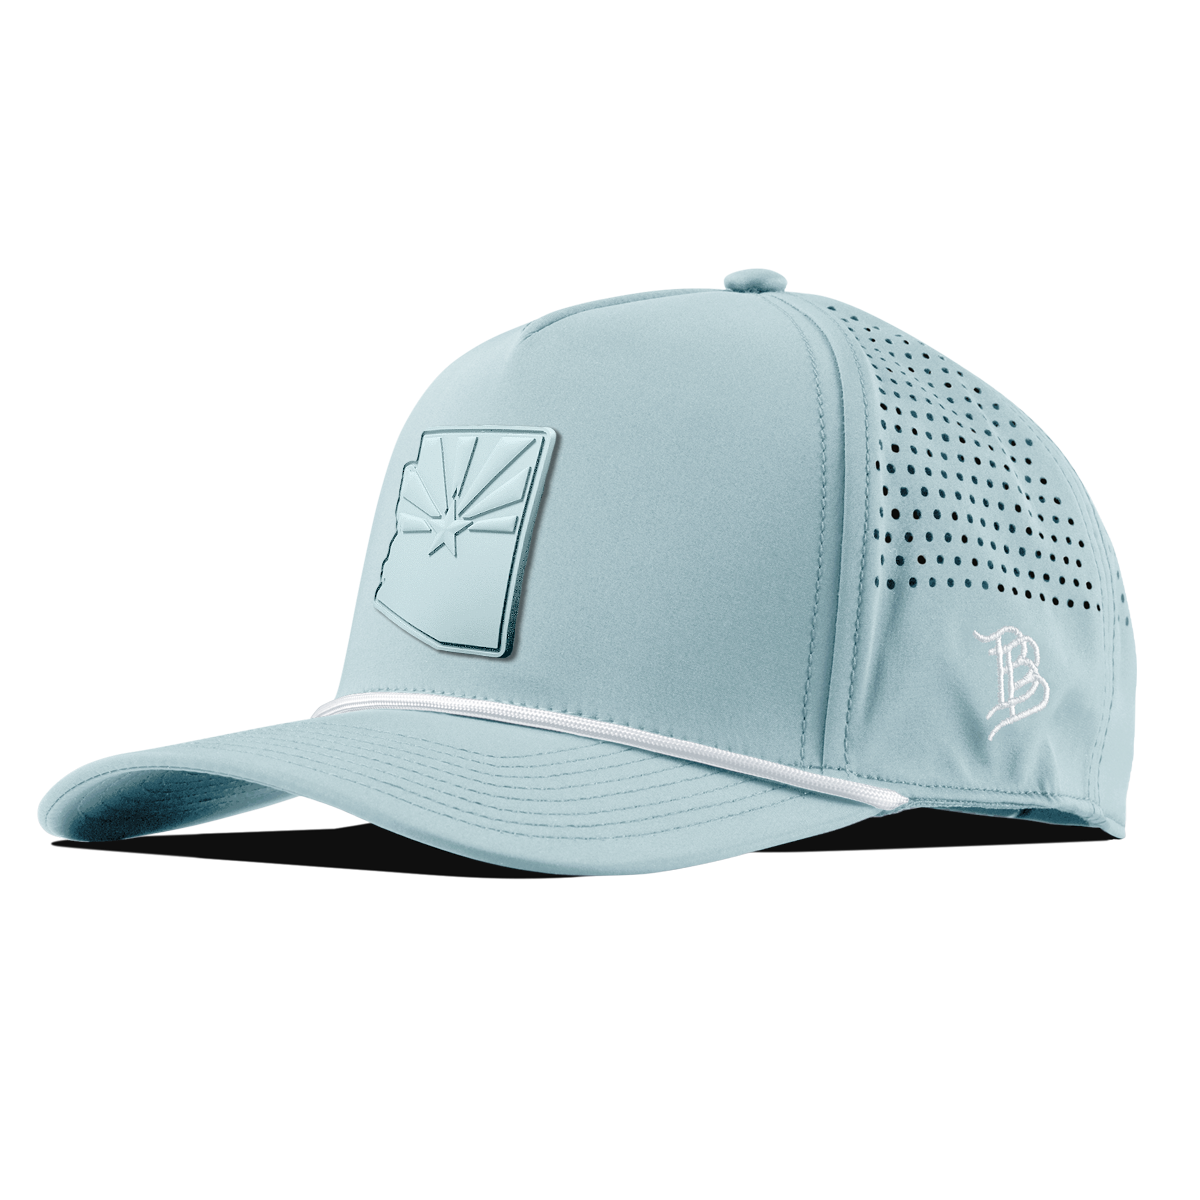 Arizona Stealth Curved 5 Panel Rope Skyblue /White